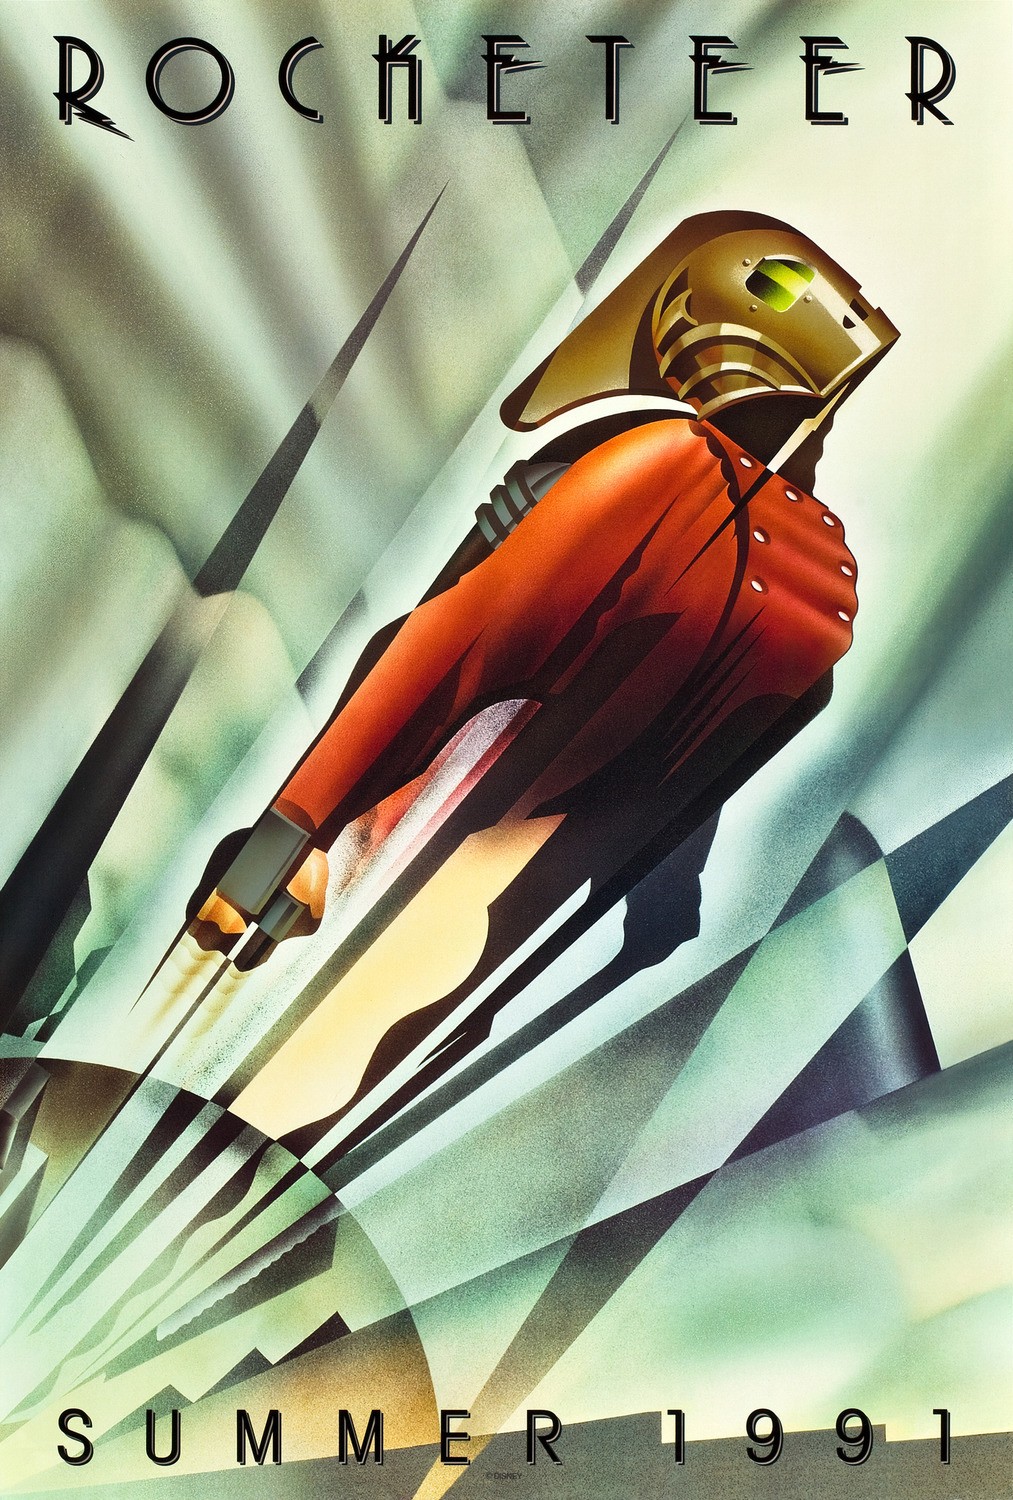 THE ROCKETEER